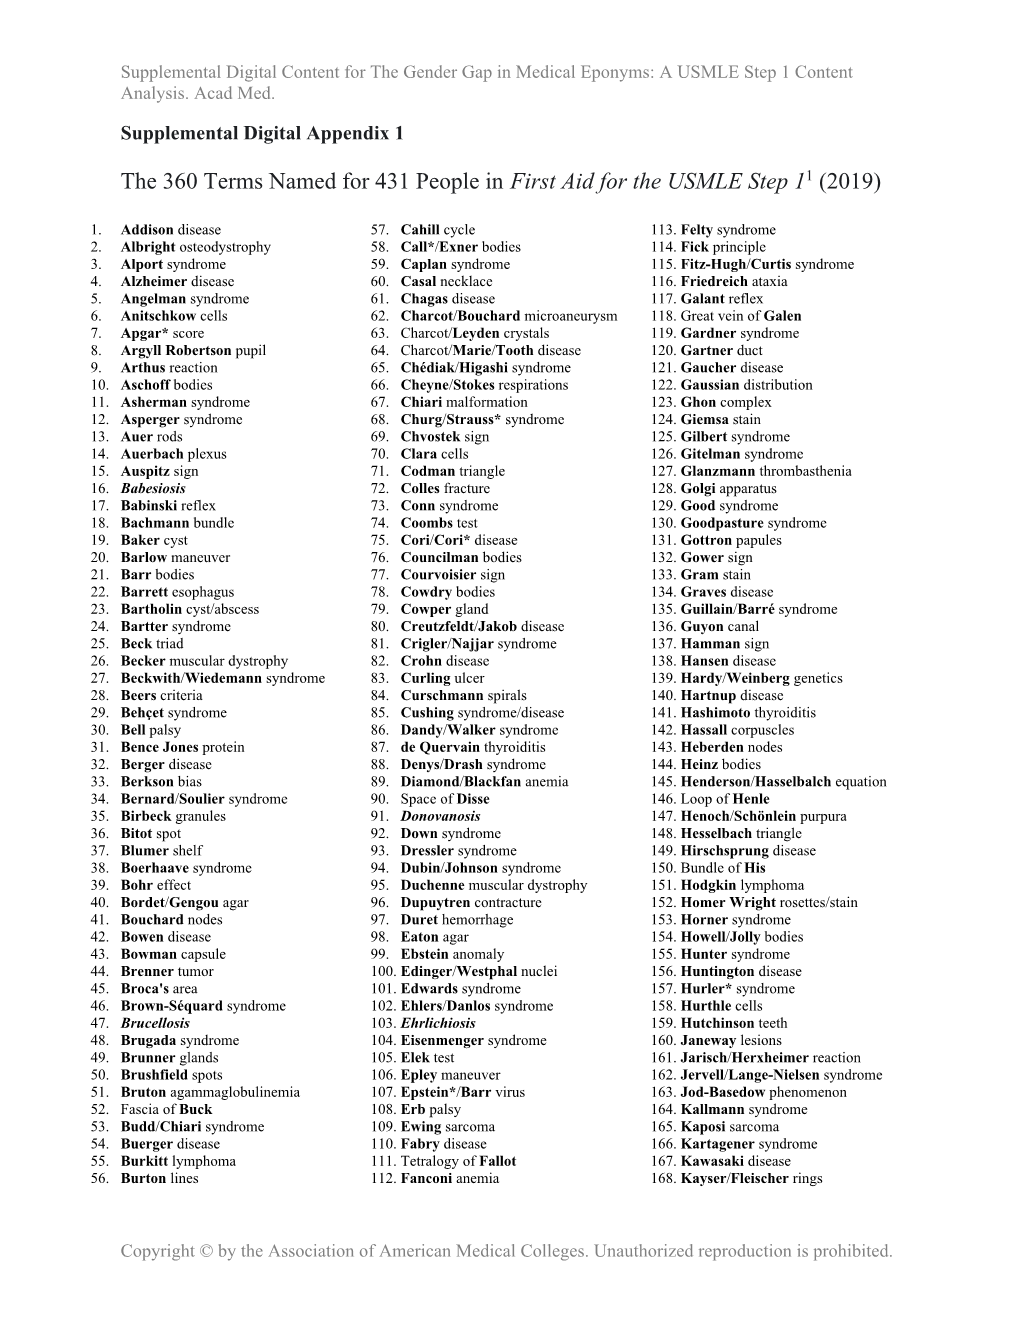 The 360 Terms Named for 431 People in First Aid for the USMLE Step 11 (2019)